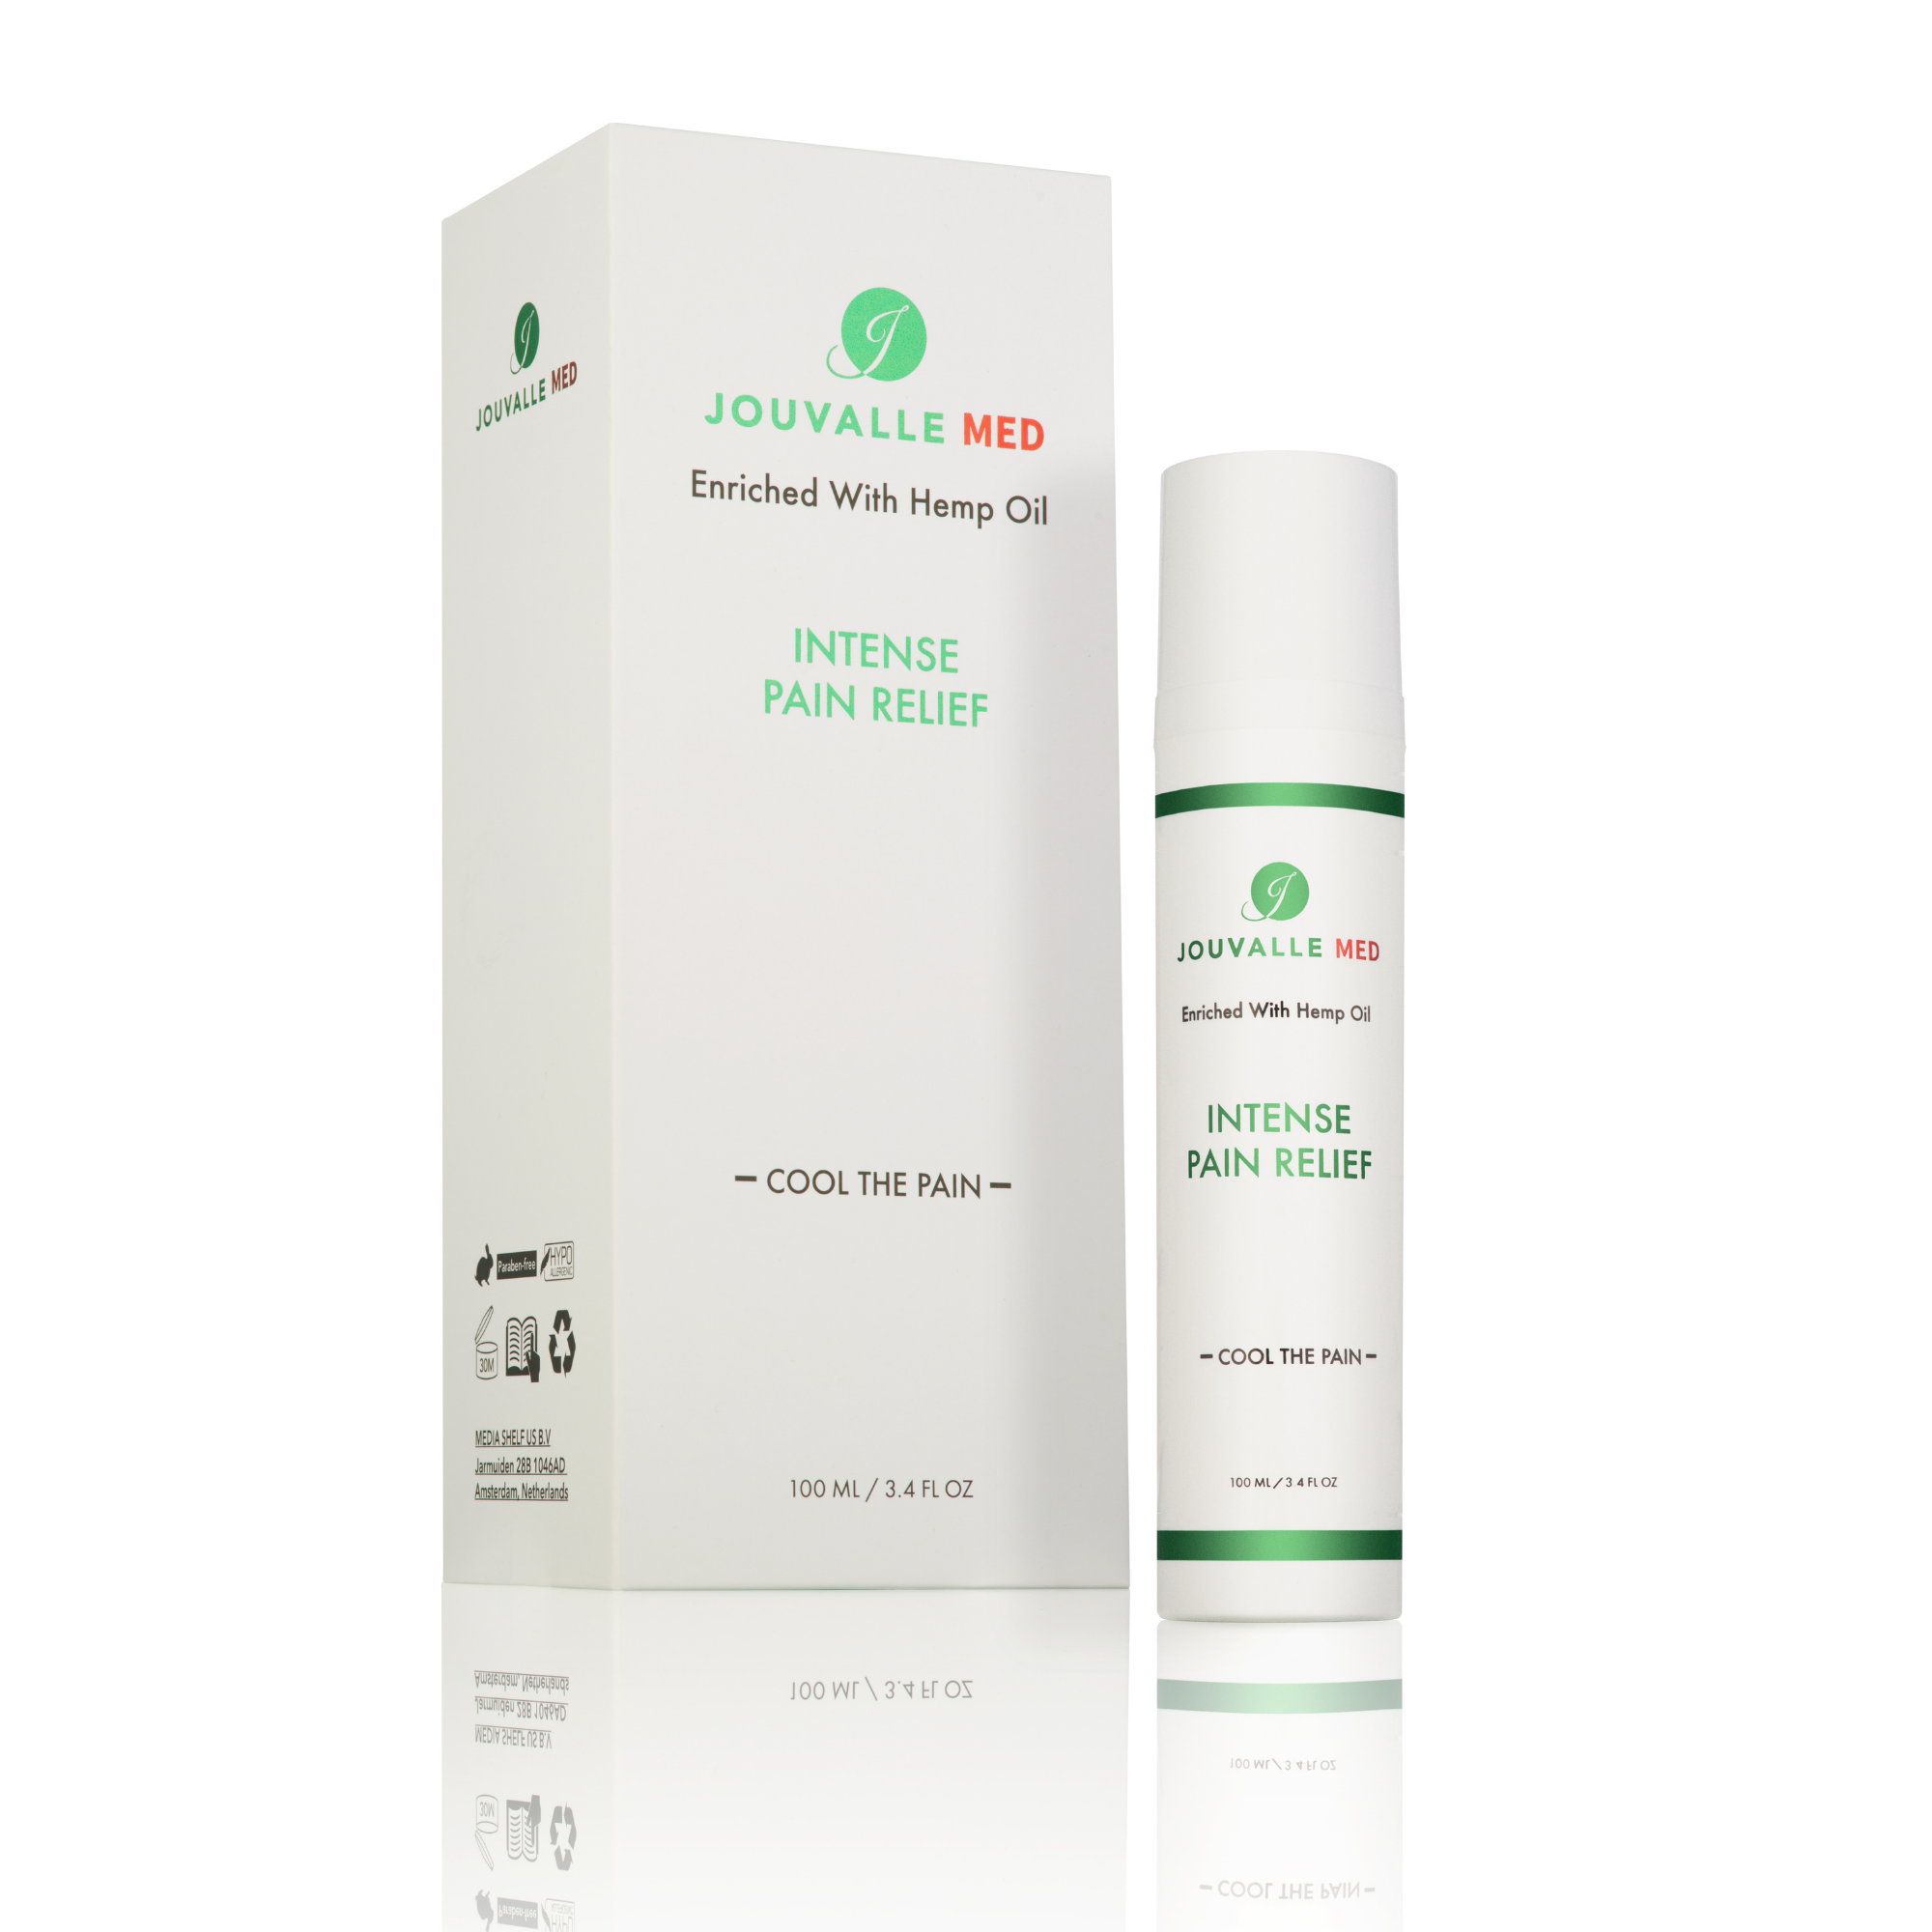 Jouvalle MED Enriched with Hemp Oil